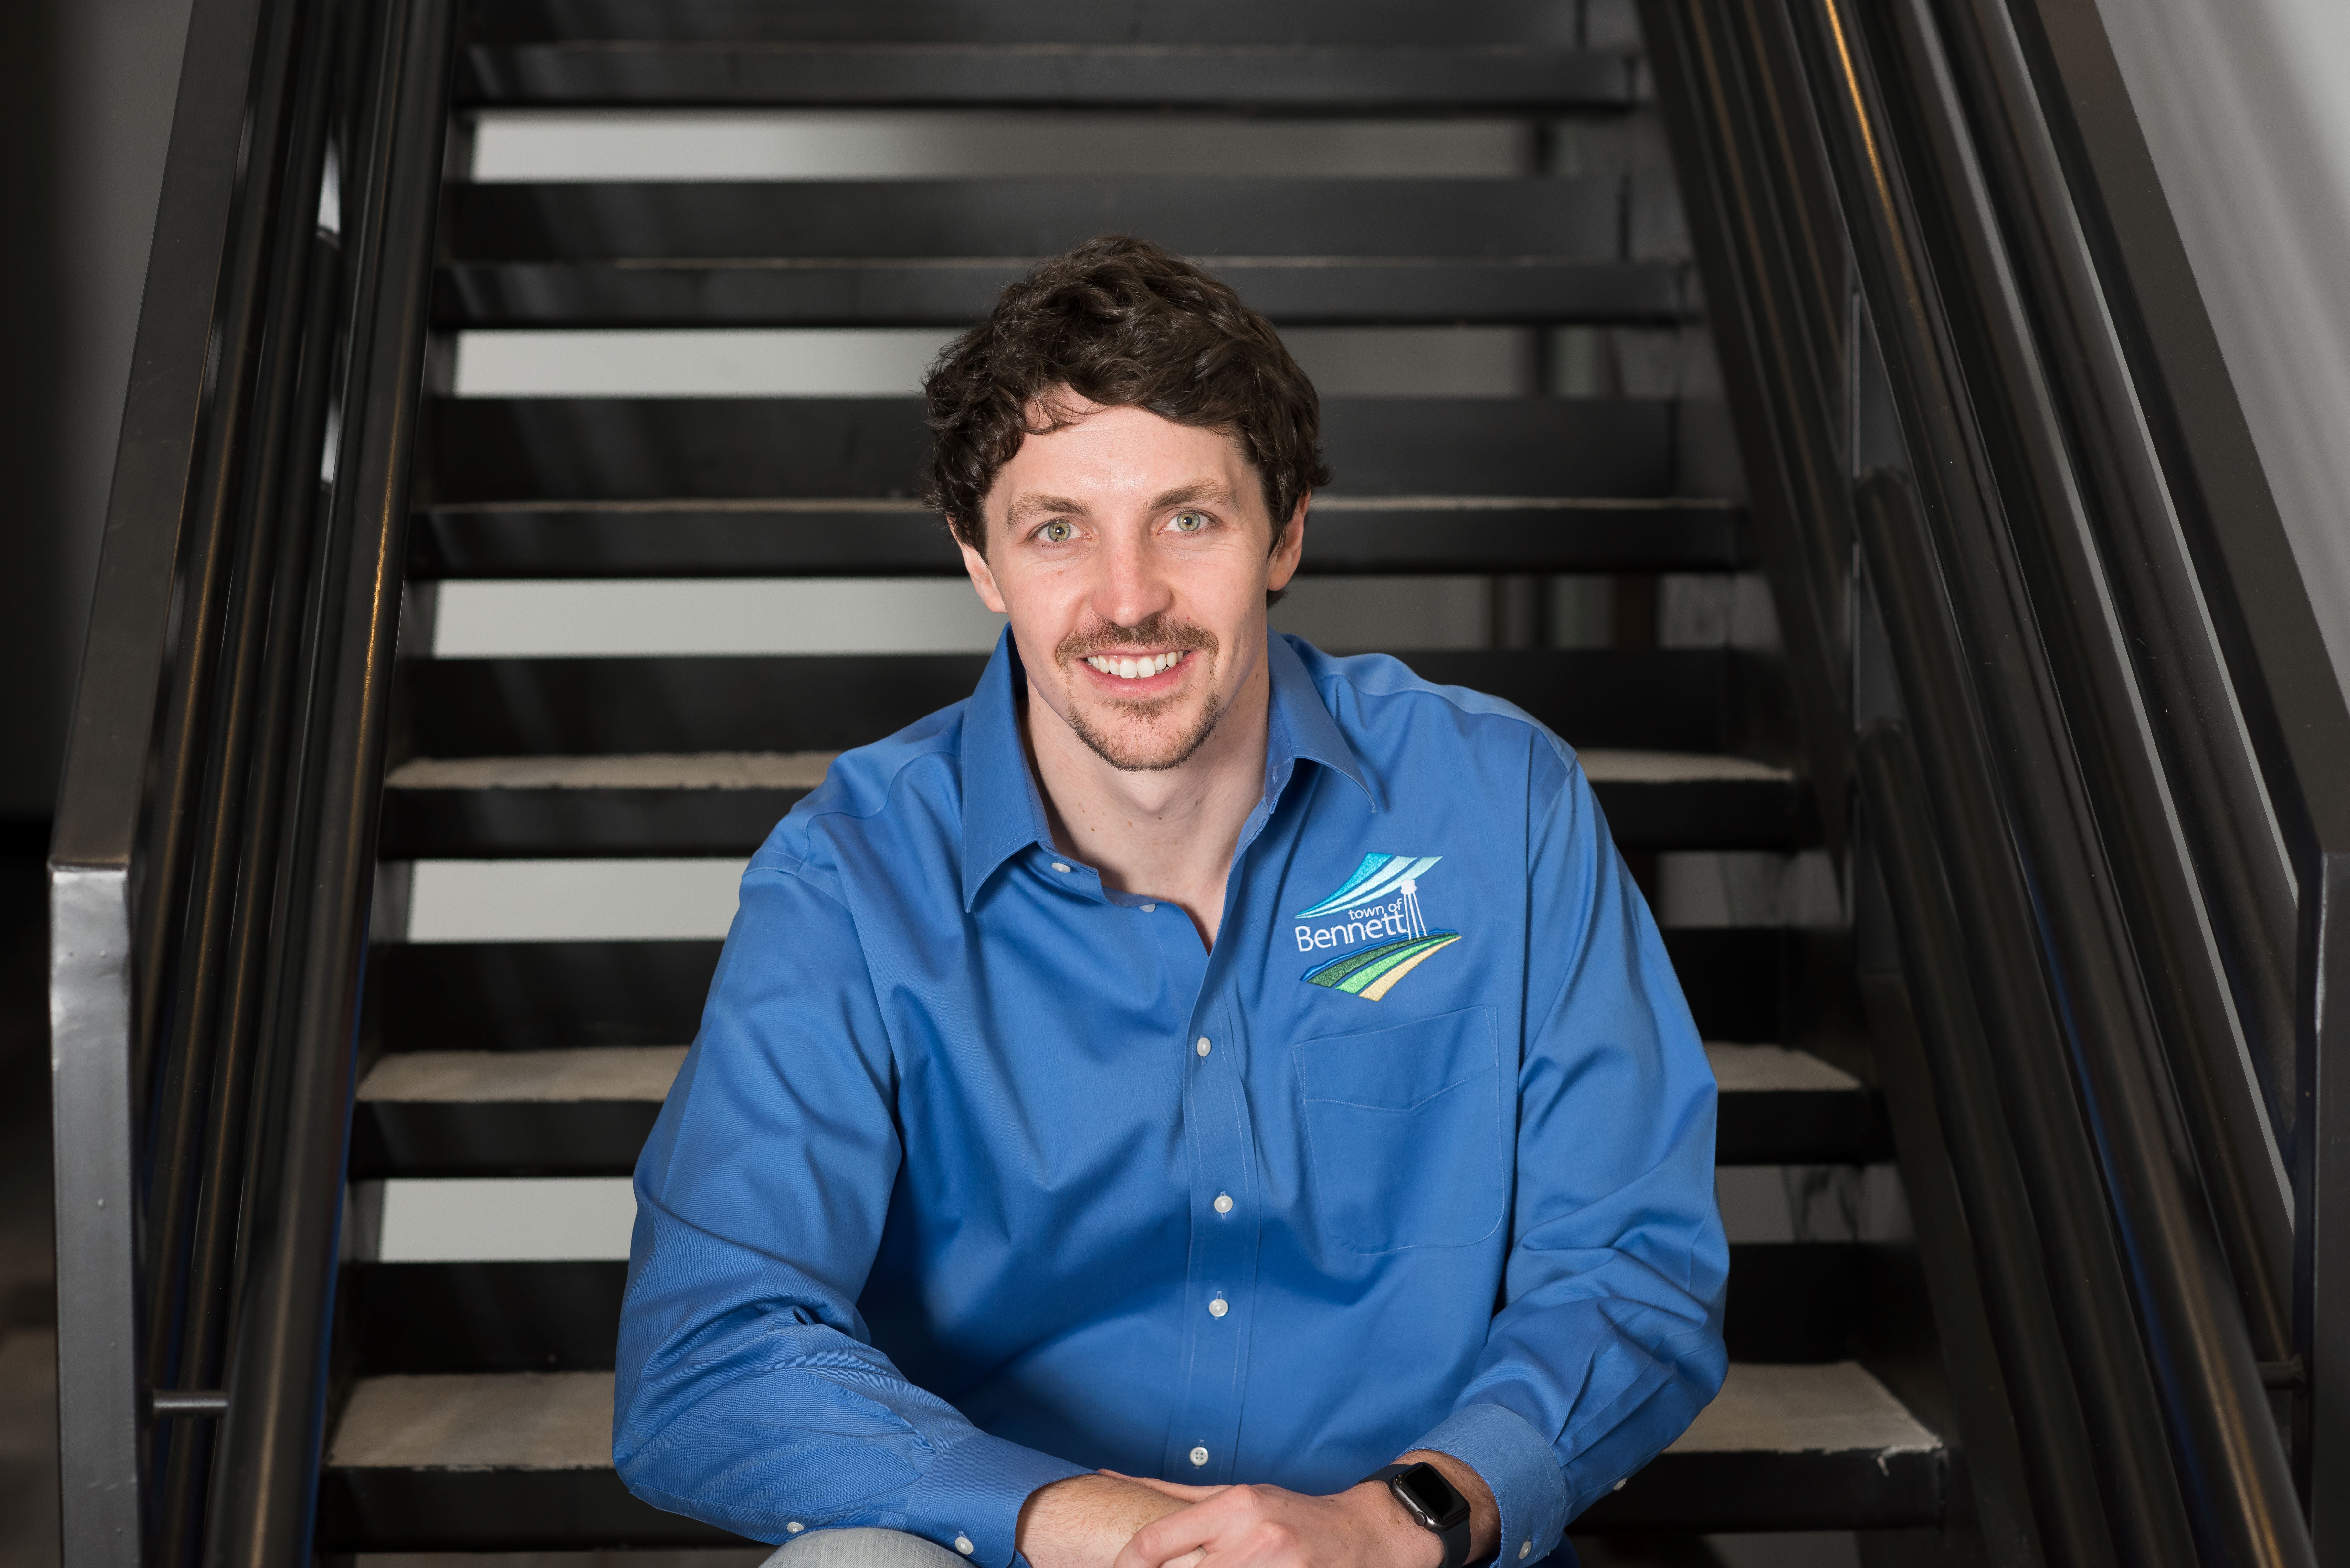 man with dark hair sitting on stairs wearing a blue shirt